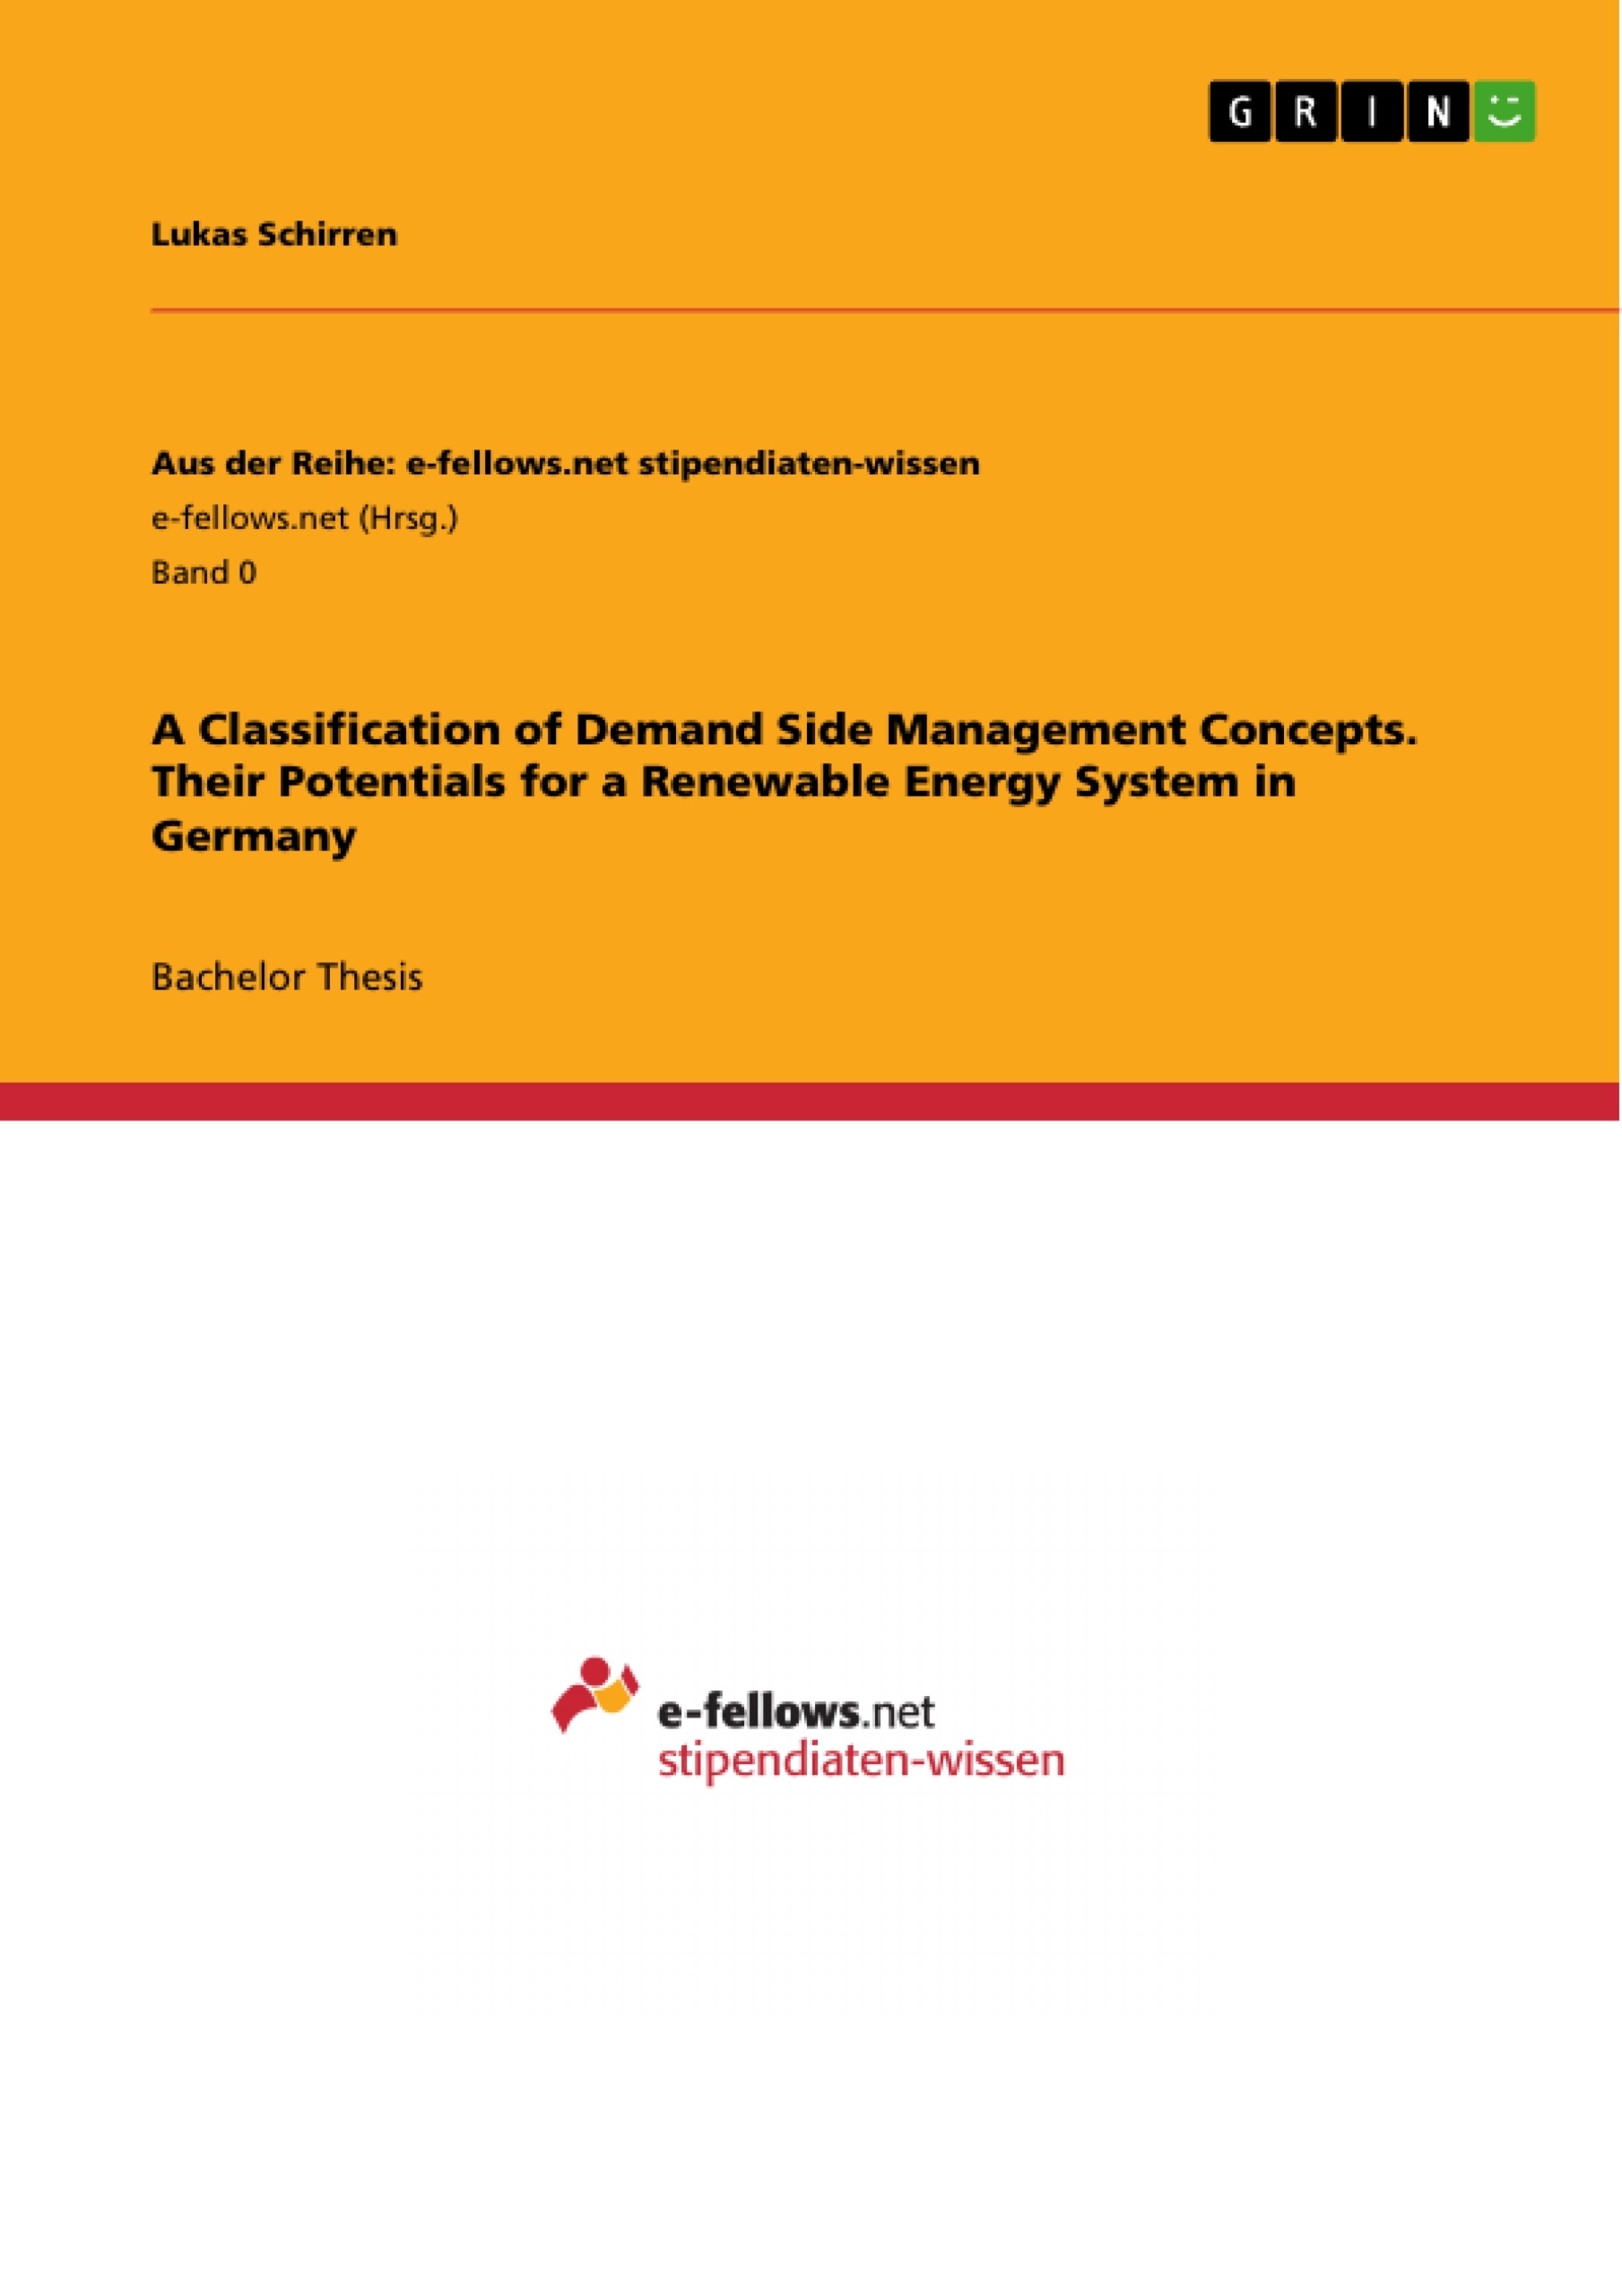 Title: A Classification of Demand Side Management Concepts. Their Potentials for a Renewable Energy System in Germany